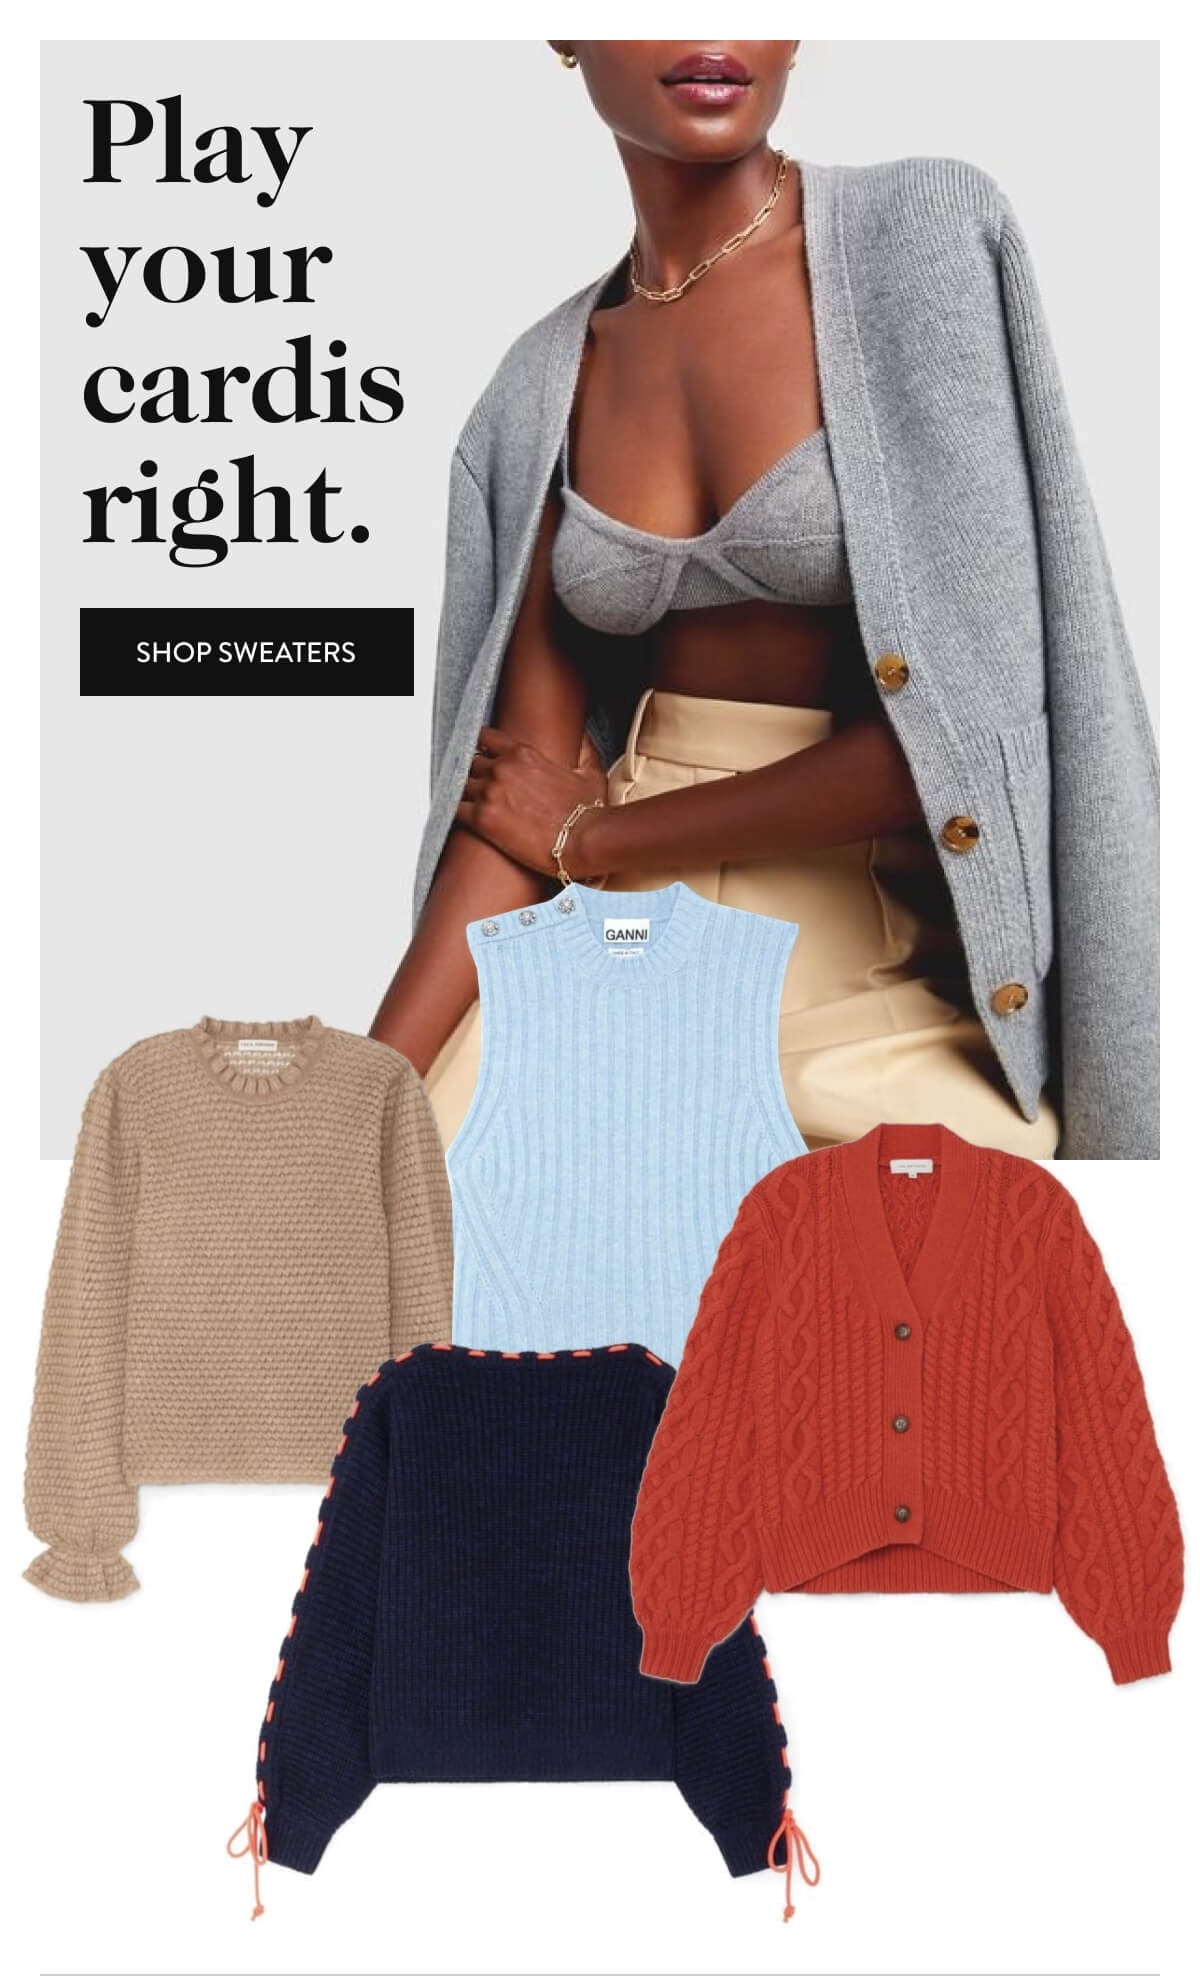 Play your cardis right. - shop sweaters